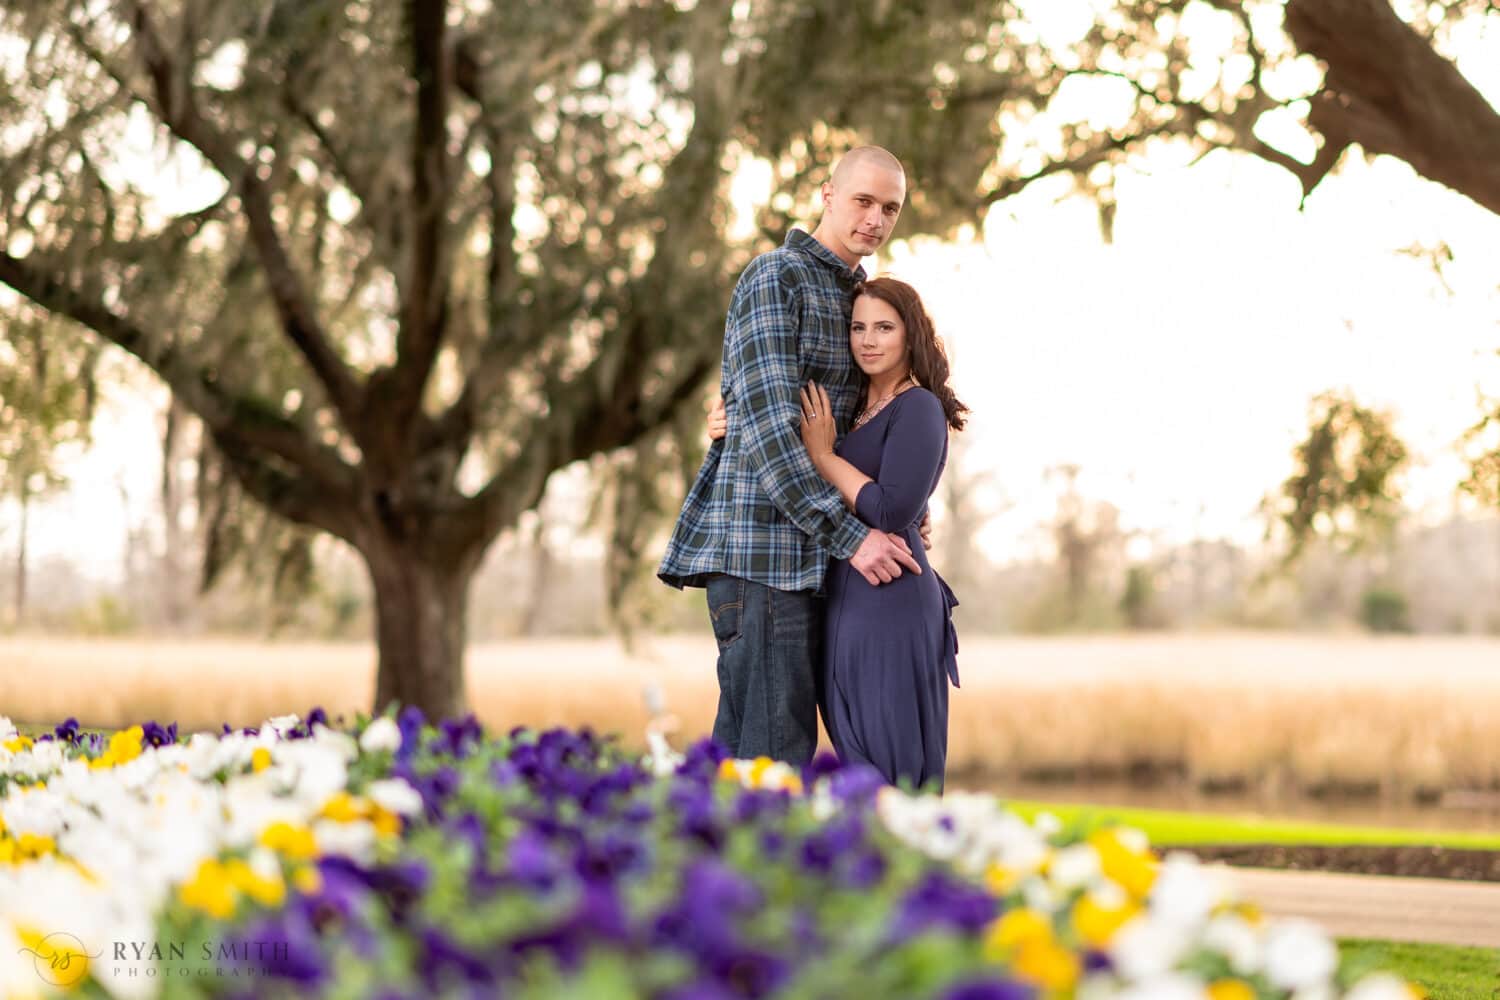 Flowers were already blooming for winter engagement pictures - Caledonia Golf and Fish Club